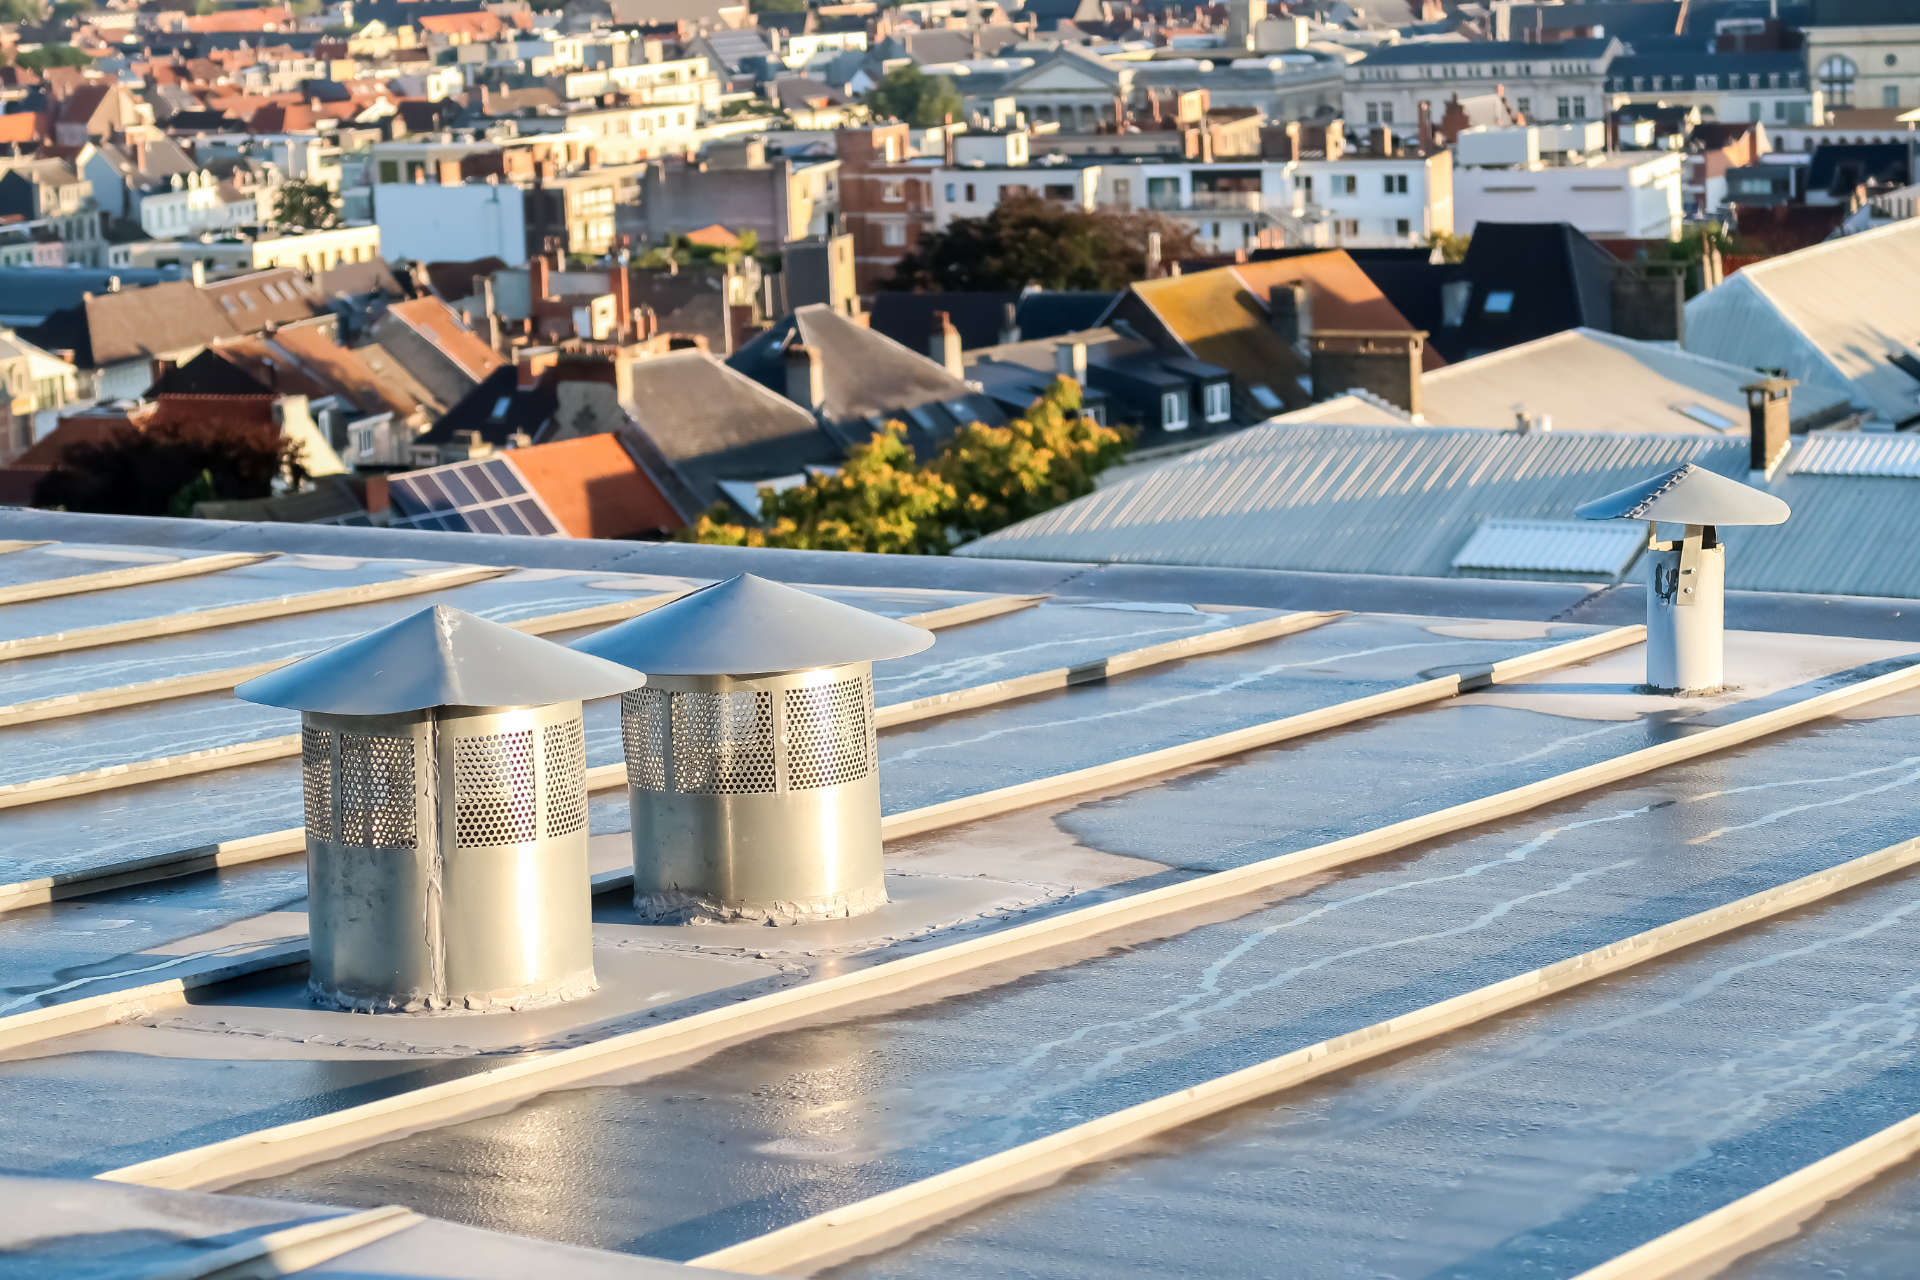 COMMON CAUSES OF COMMERCIAL ROOF LEAKS